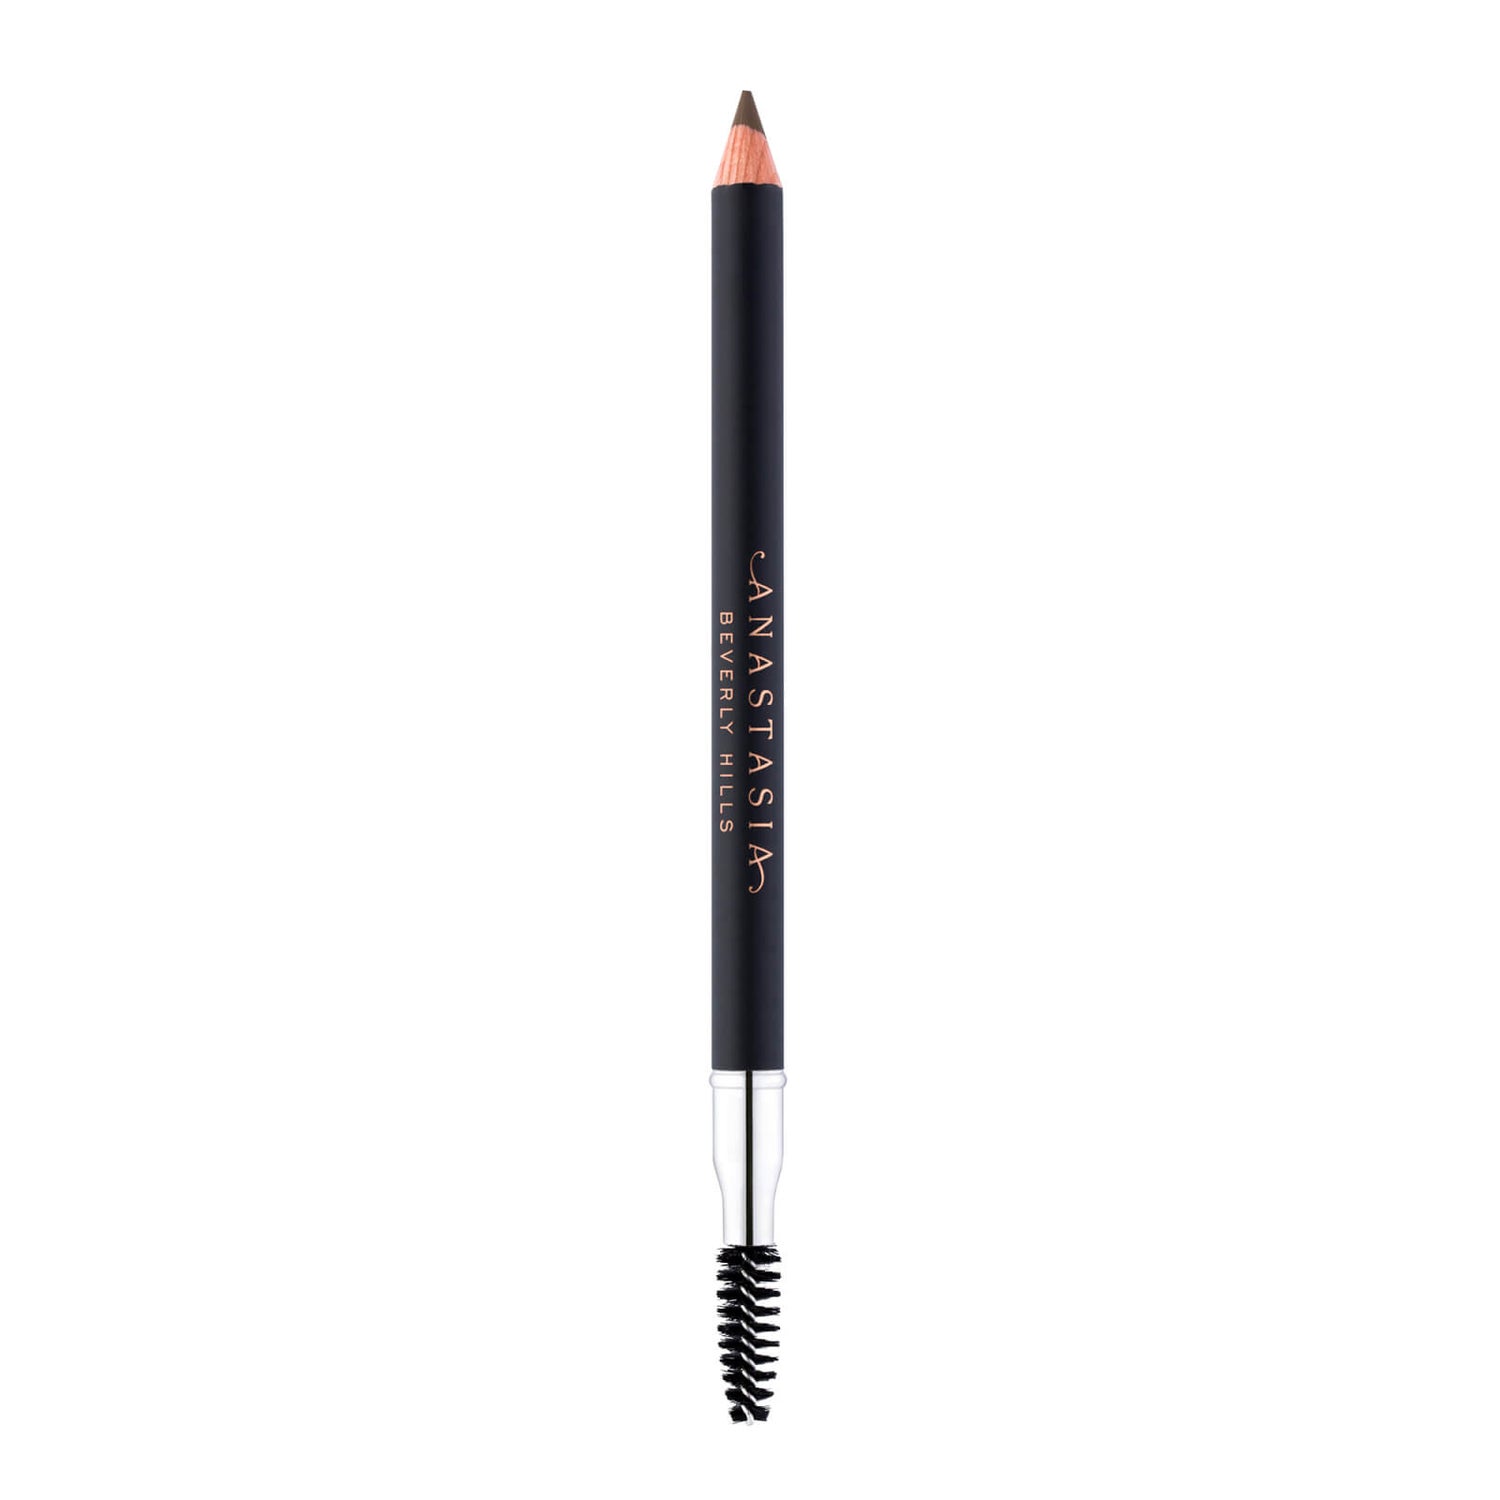 Anastasia Beverly Hills Perfect Brow Pencil 0.95g (Various Shades)